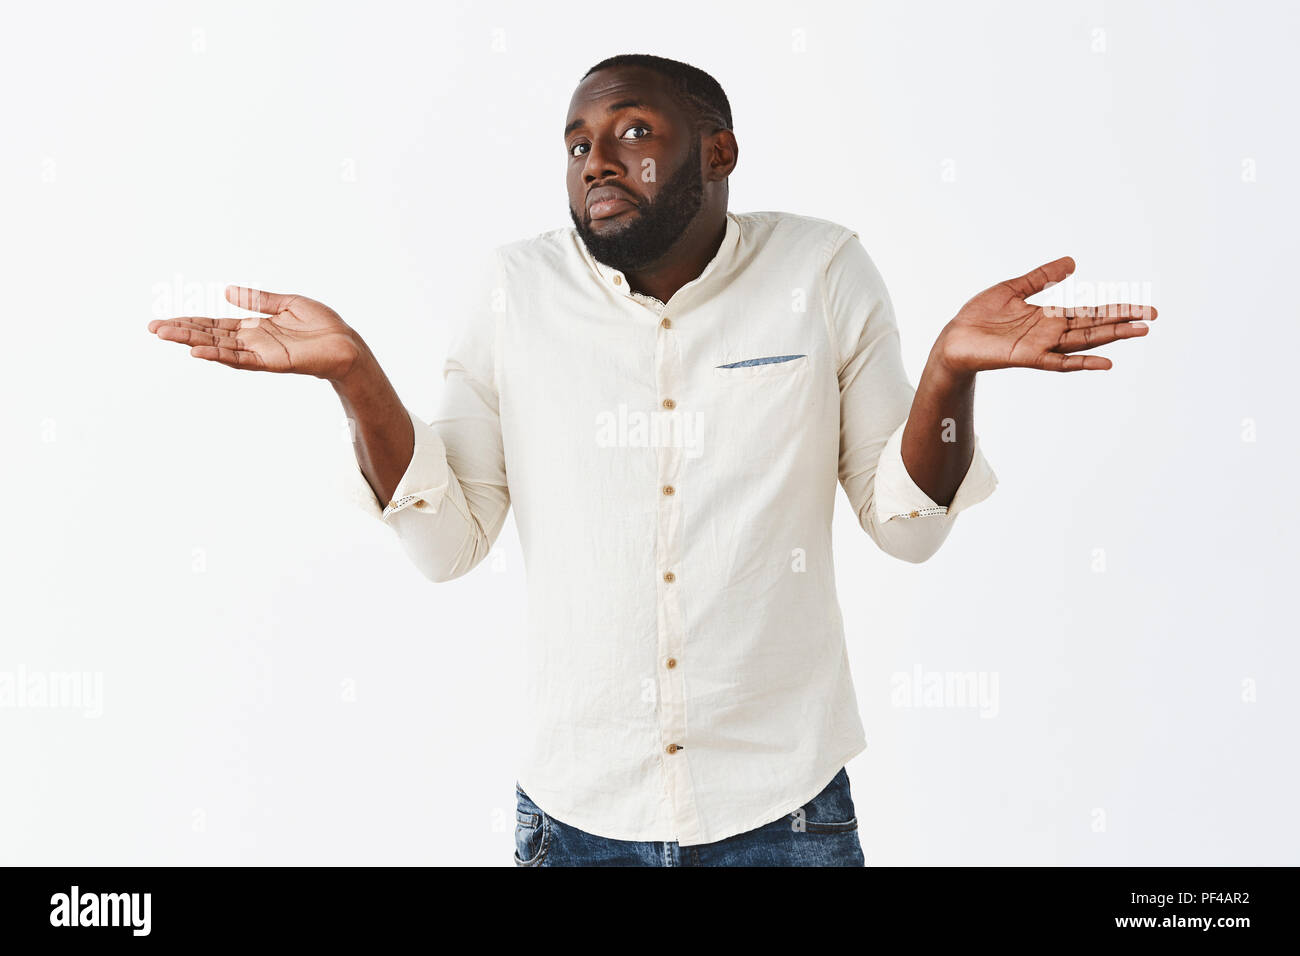 Bro have no idea. Portrait of clueless handsome African American in white shirt and jeans, shrugging with both hands aside, pursing lips and pouting, being unaware and uncertain in answer Stock Photo